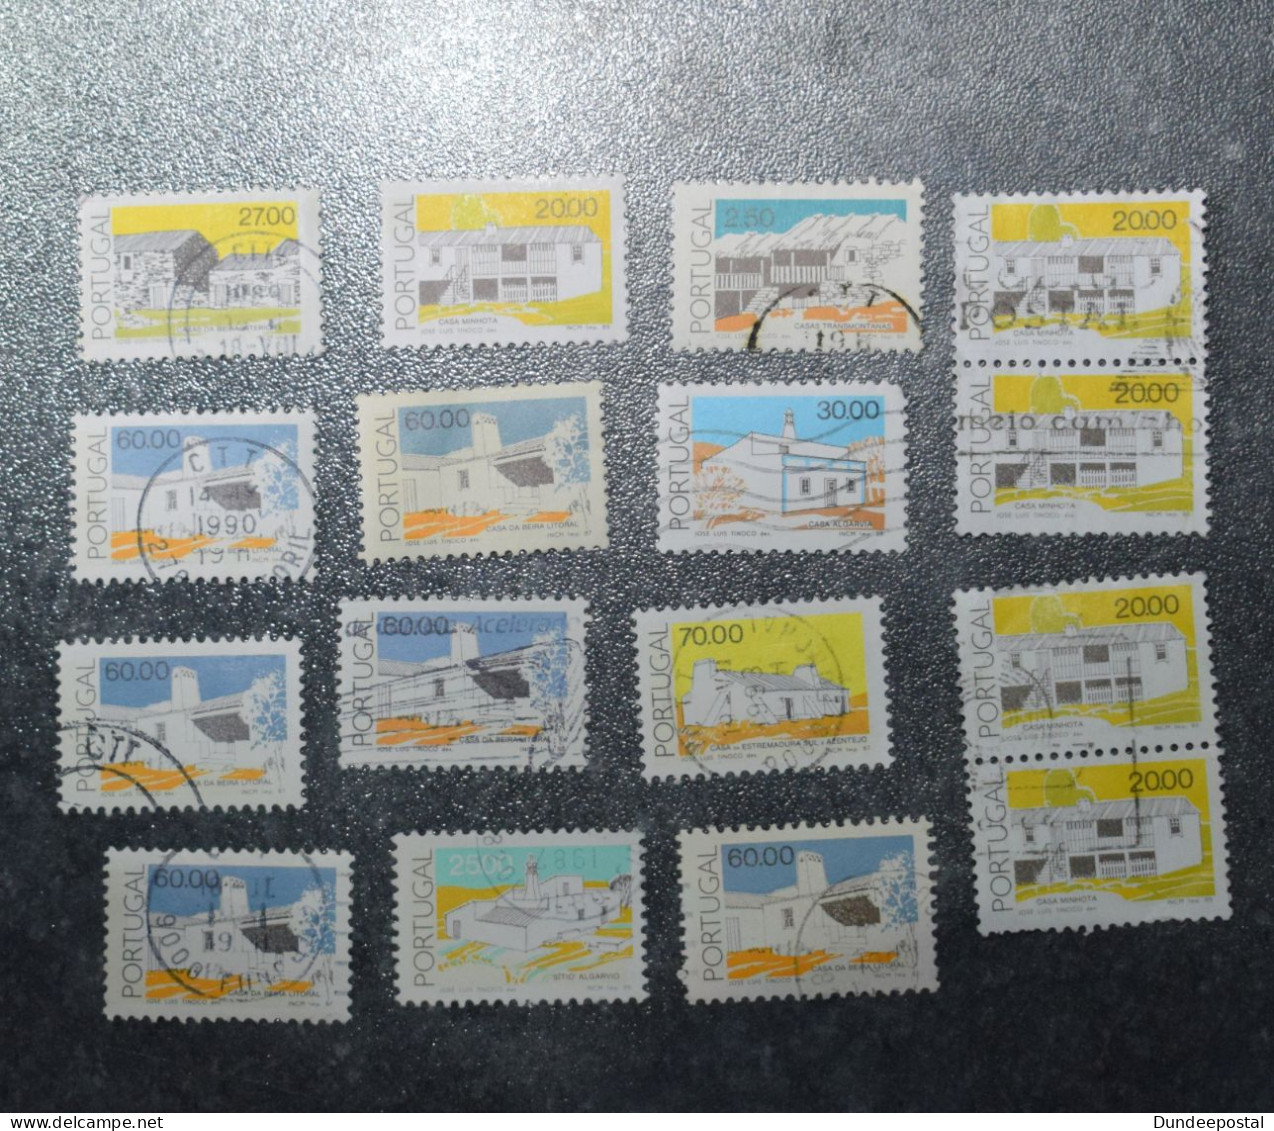 PORTUGAL STAMPS  Portugal Architecture 1985 - 88  ~~L@@K~~ - Used Stamps